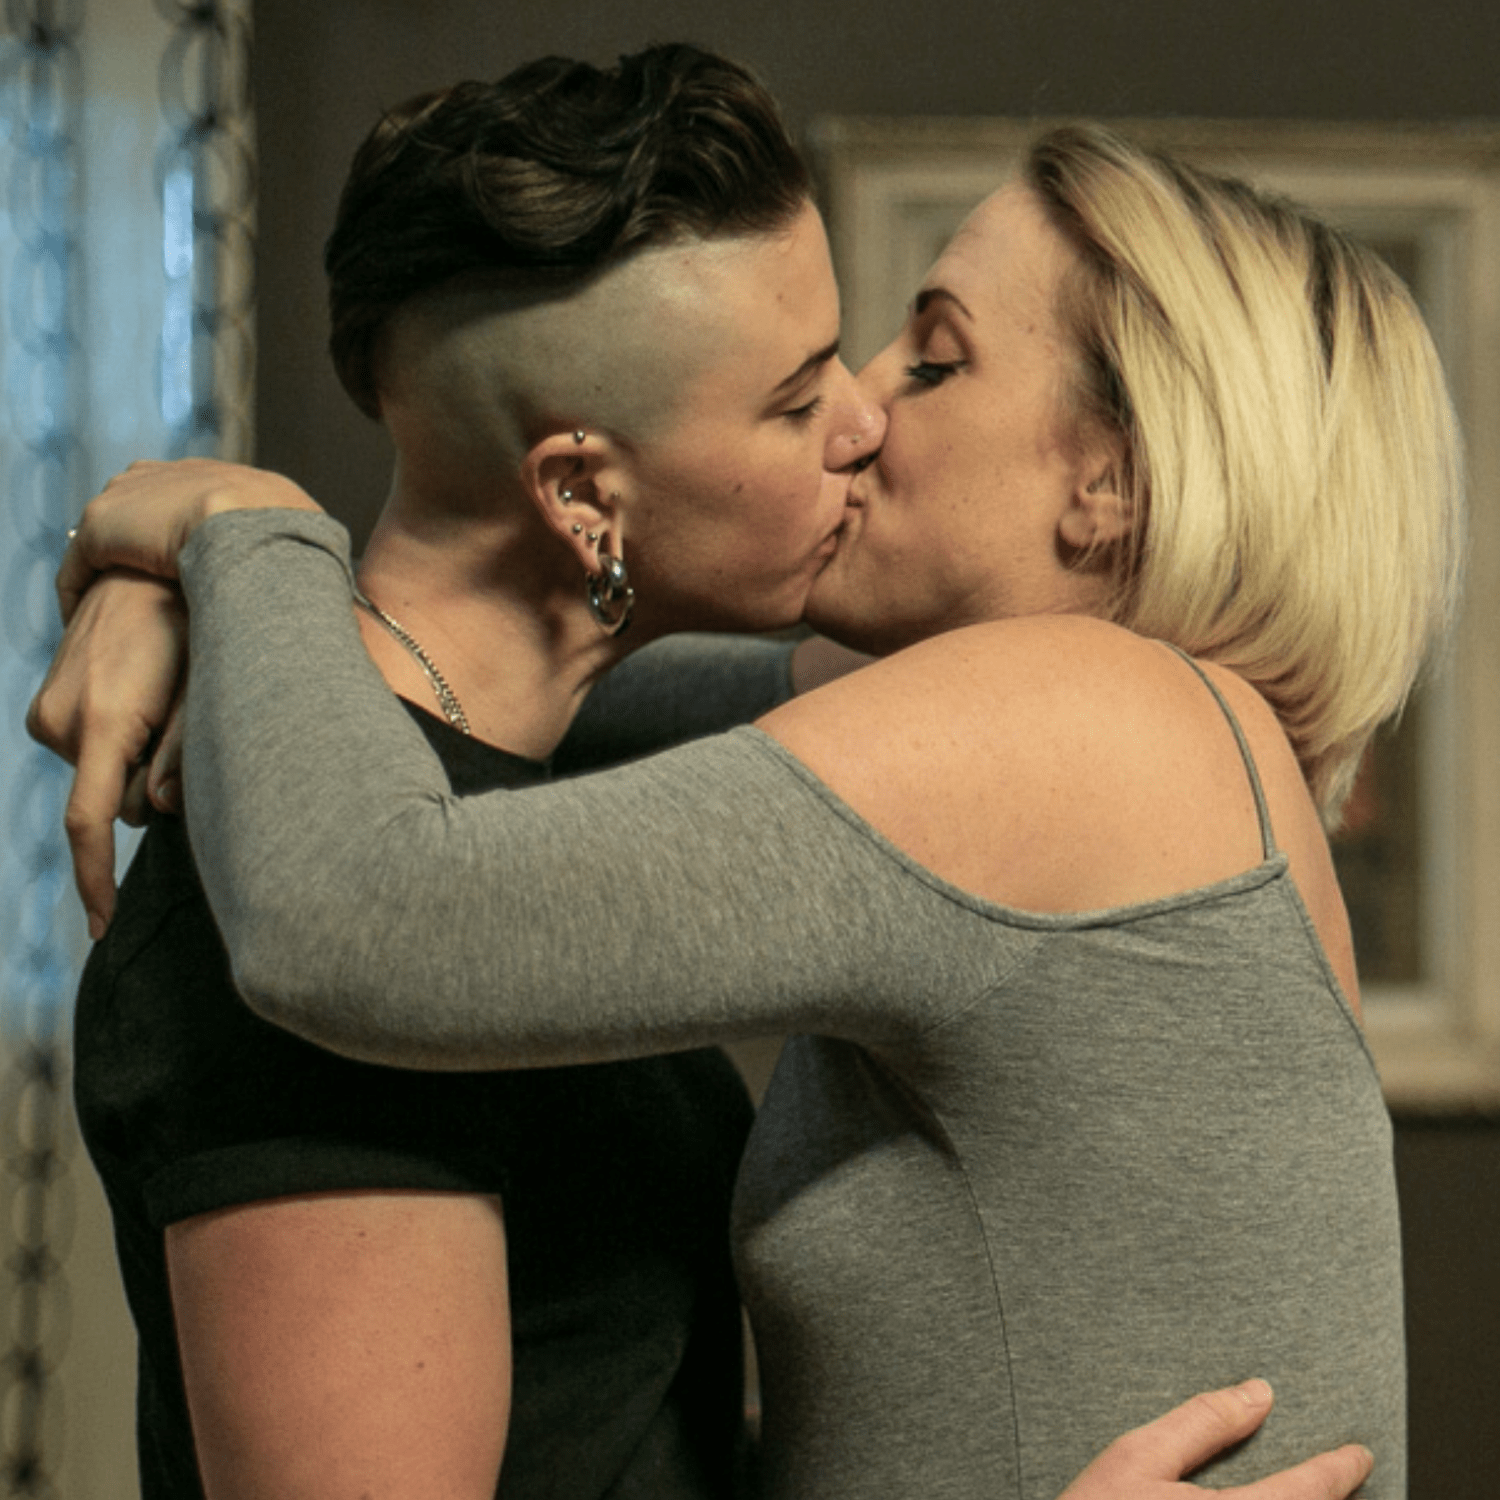 Two women kissing passionately